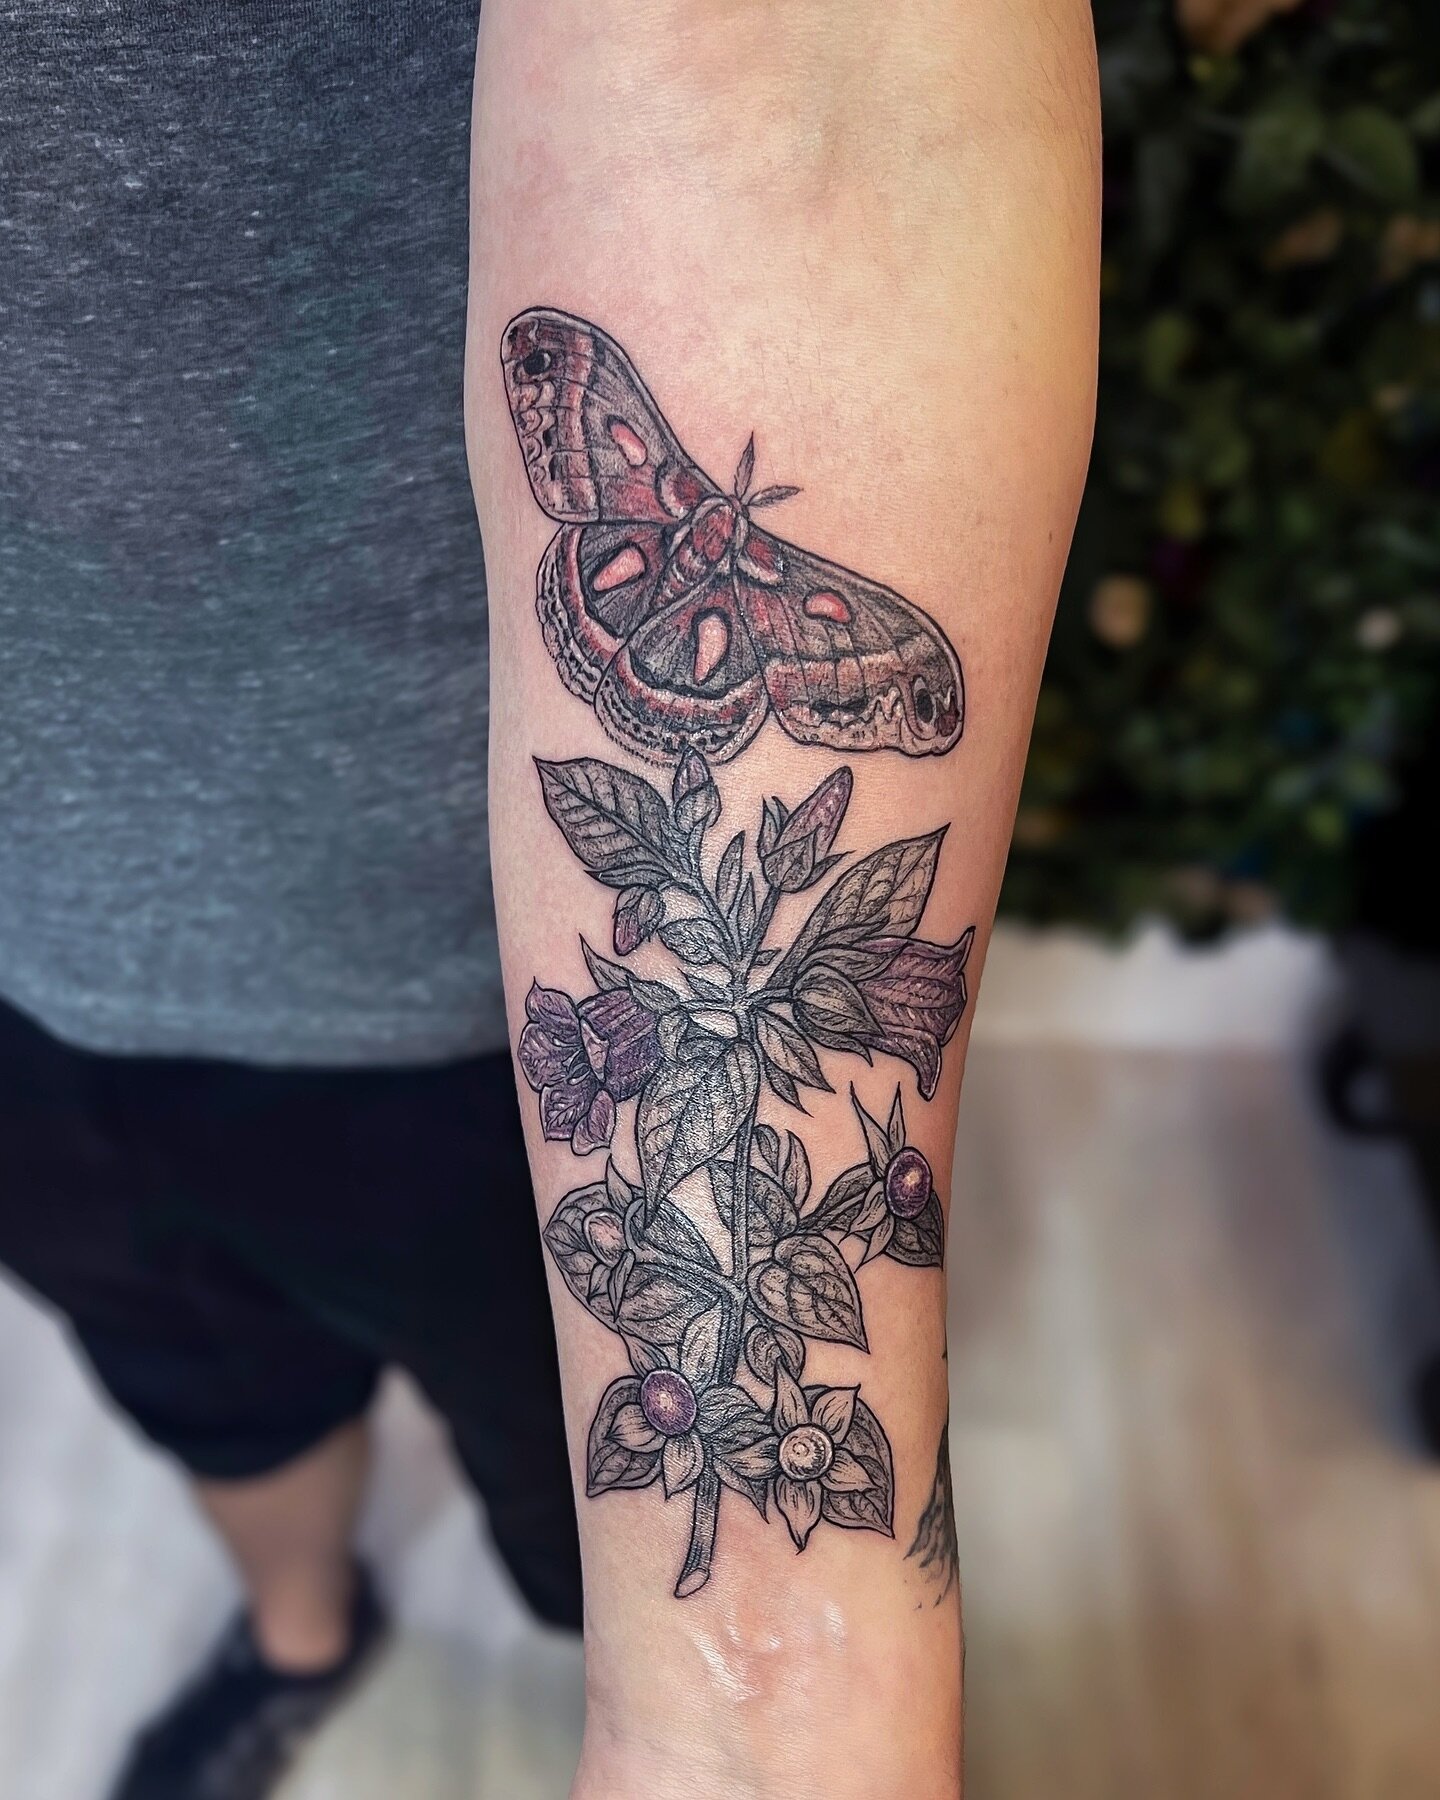 Cecropia moth and belladonna flowers 💫 for an aspiring novelist. Thanks as always K. Rare two color tattoo!!